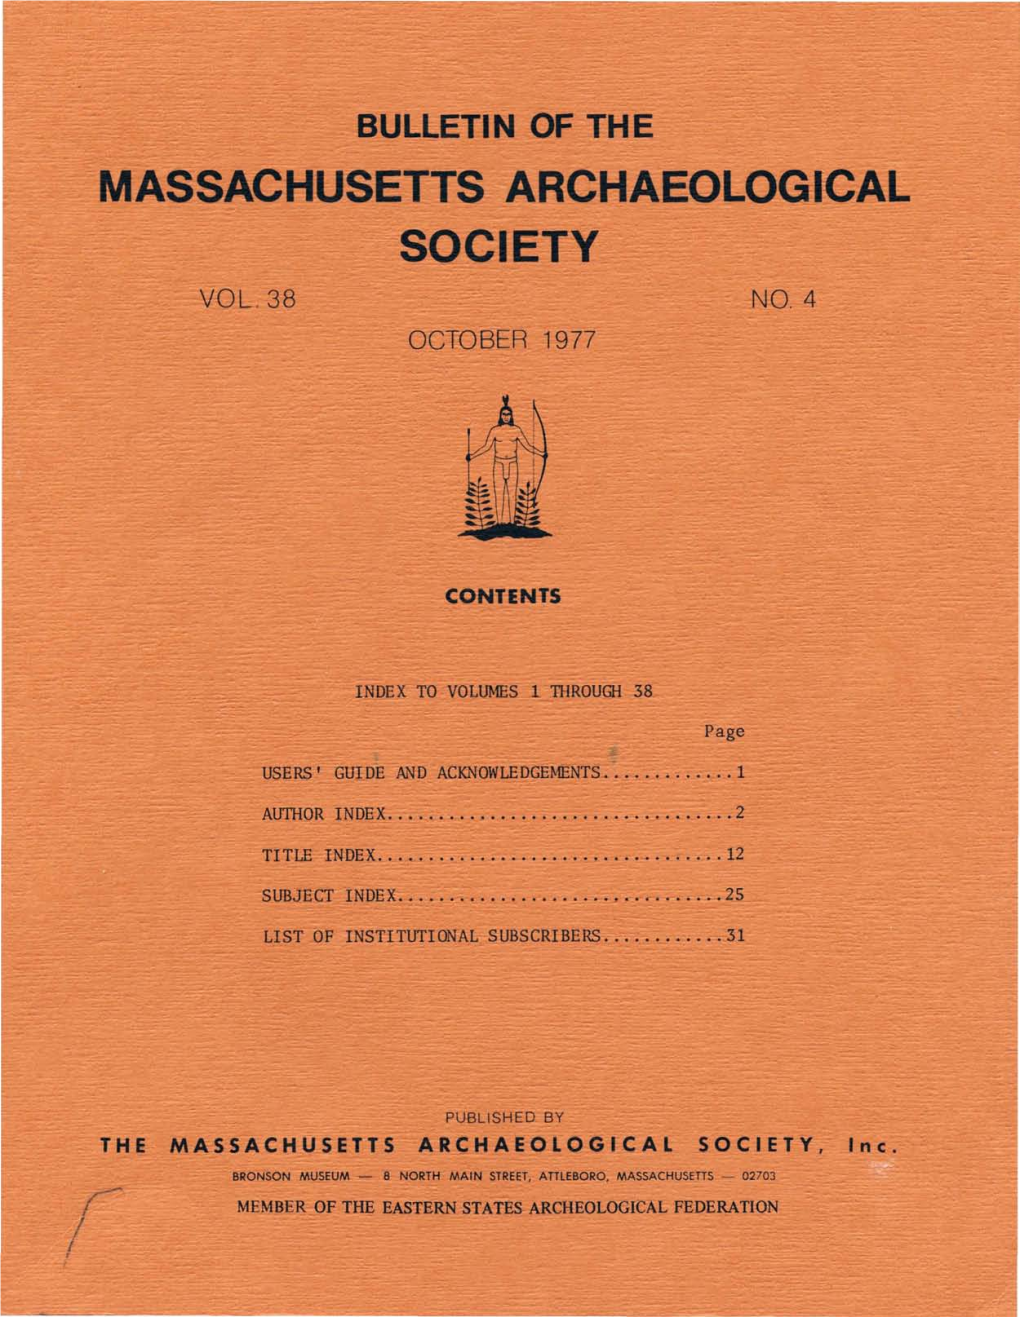 Bulletin of the Massachusetts Archaeological Society, Vol. 38, No